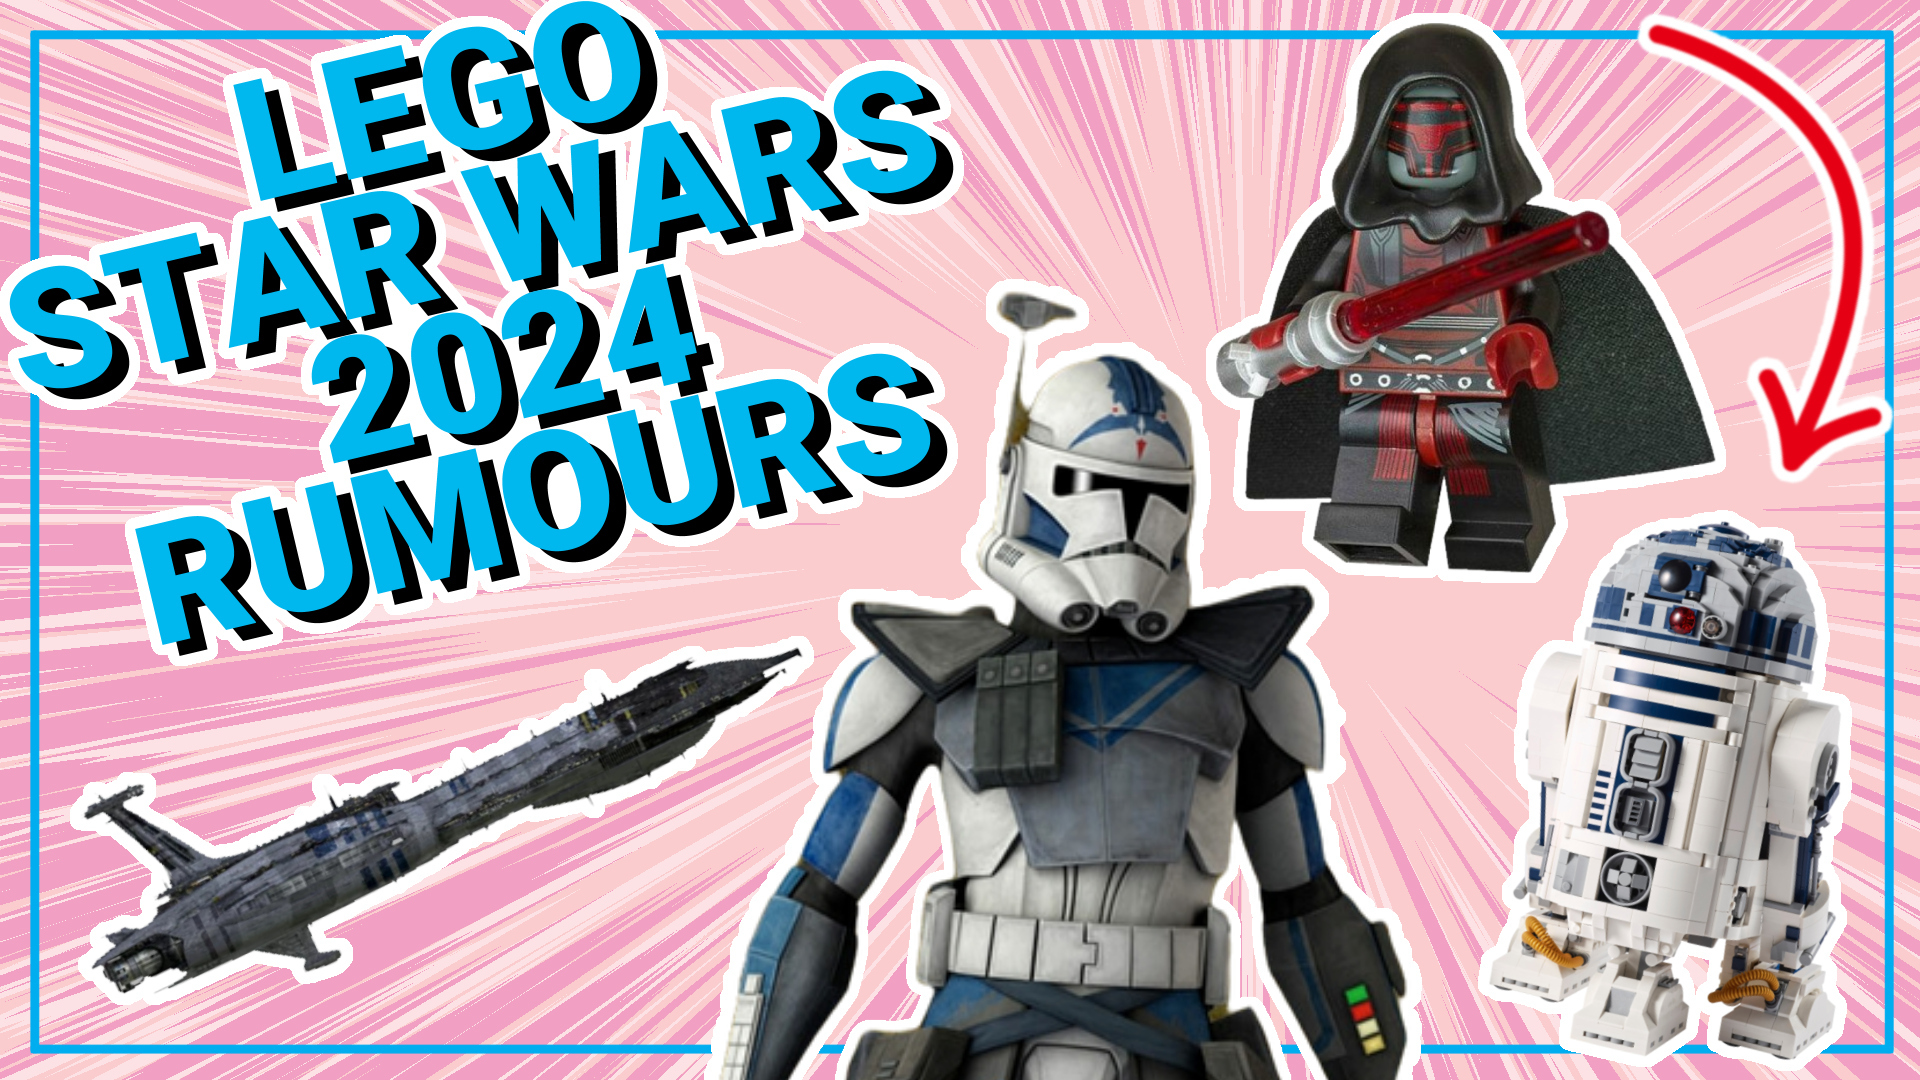 LEGO Star Wars 2024 rumours are wonderfully obscure